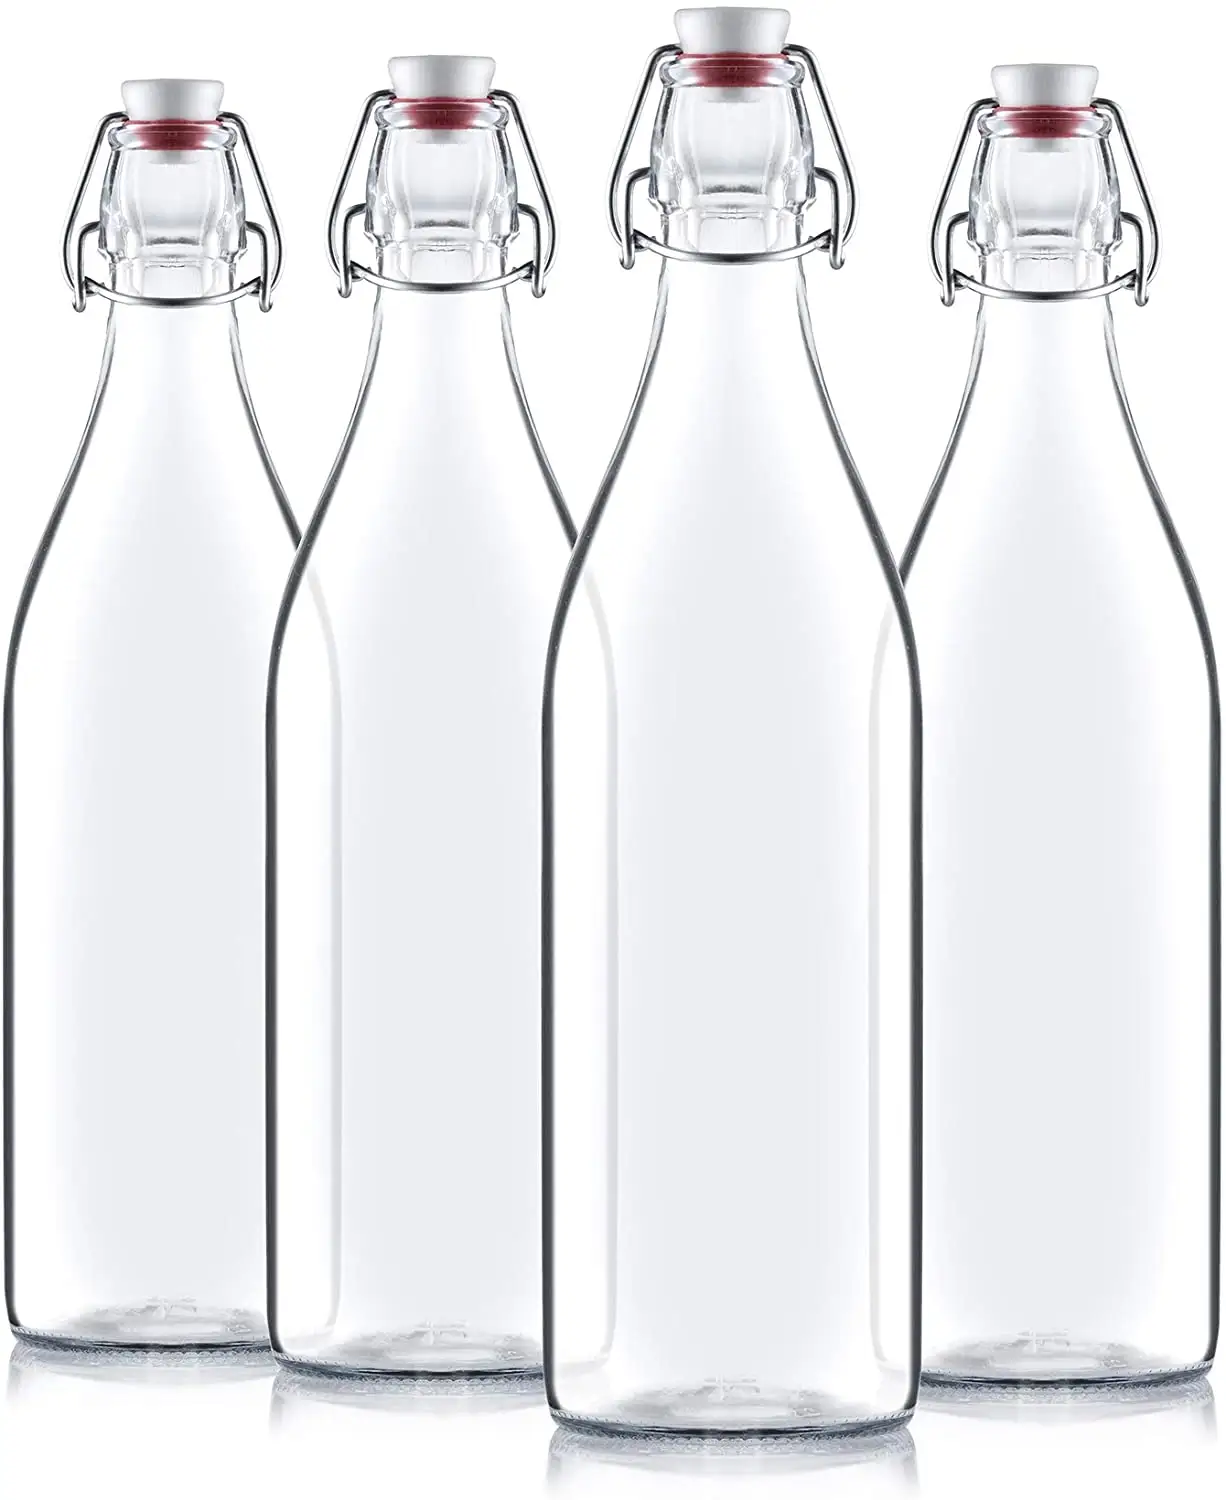 Flip Top Glass Bottles Swing Top Brew Bottle with Stopper for Beverages Oils Beer Water Airtight Clear